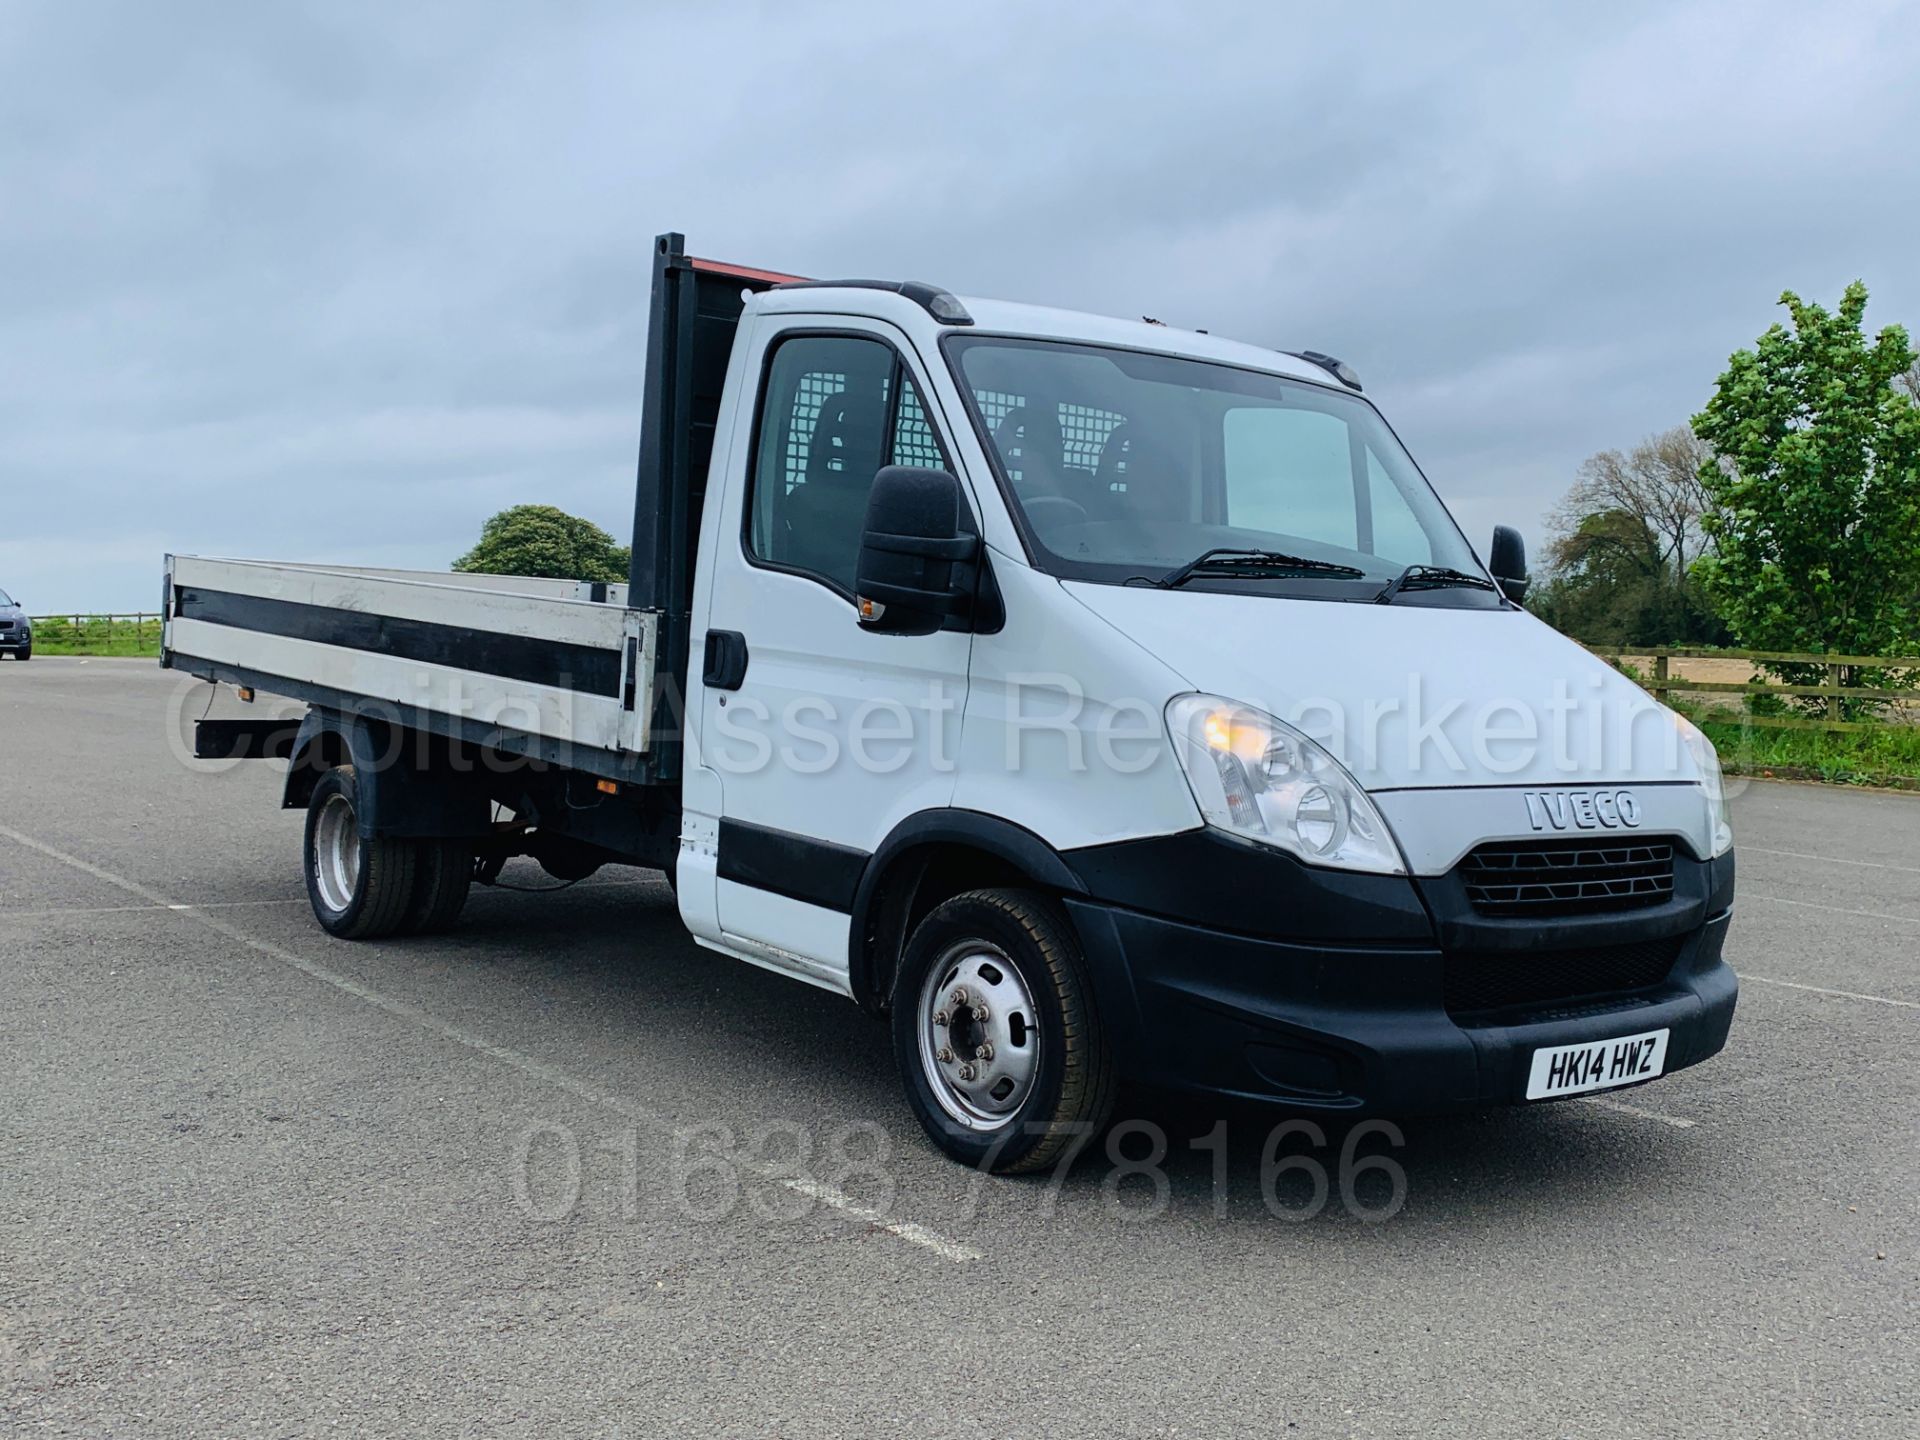 ON SALE IVECO DAILY 35C13 *LWB - DROPSIDE TRUCK* (2014 NEW MODEL) '2.3 DIESEL - 6 SPEED' (3500 KG) - Image 2 of 29